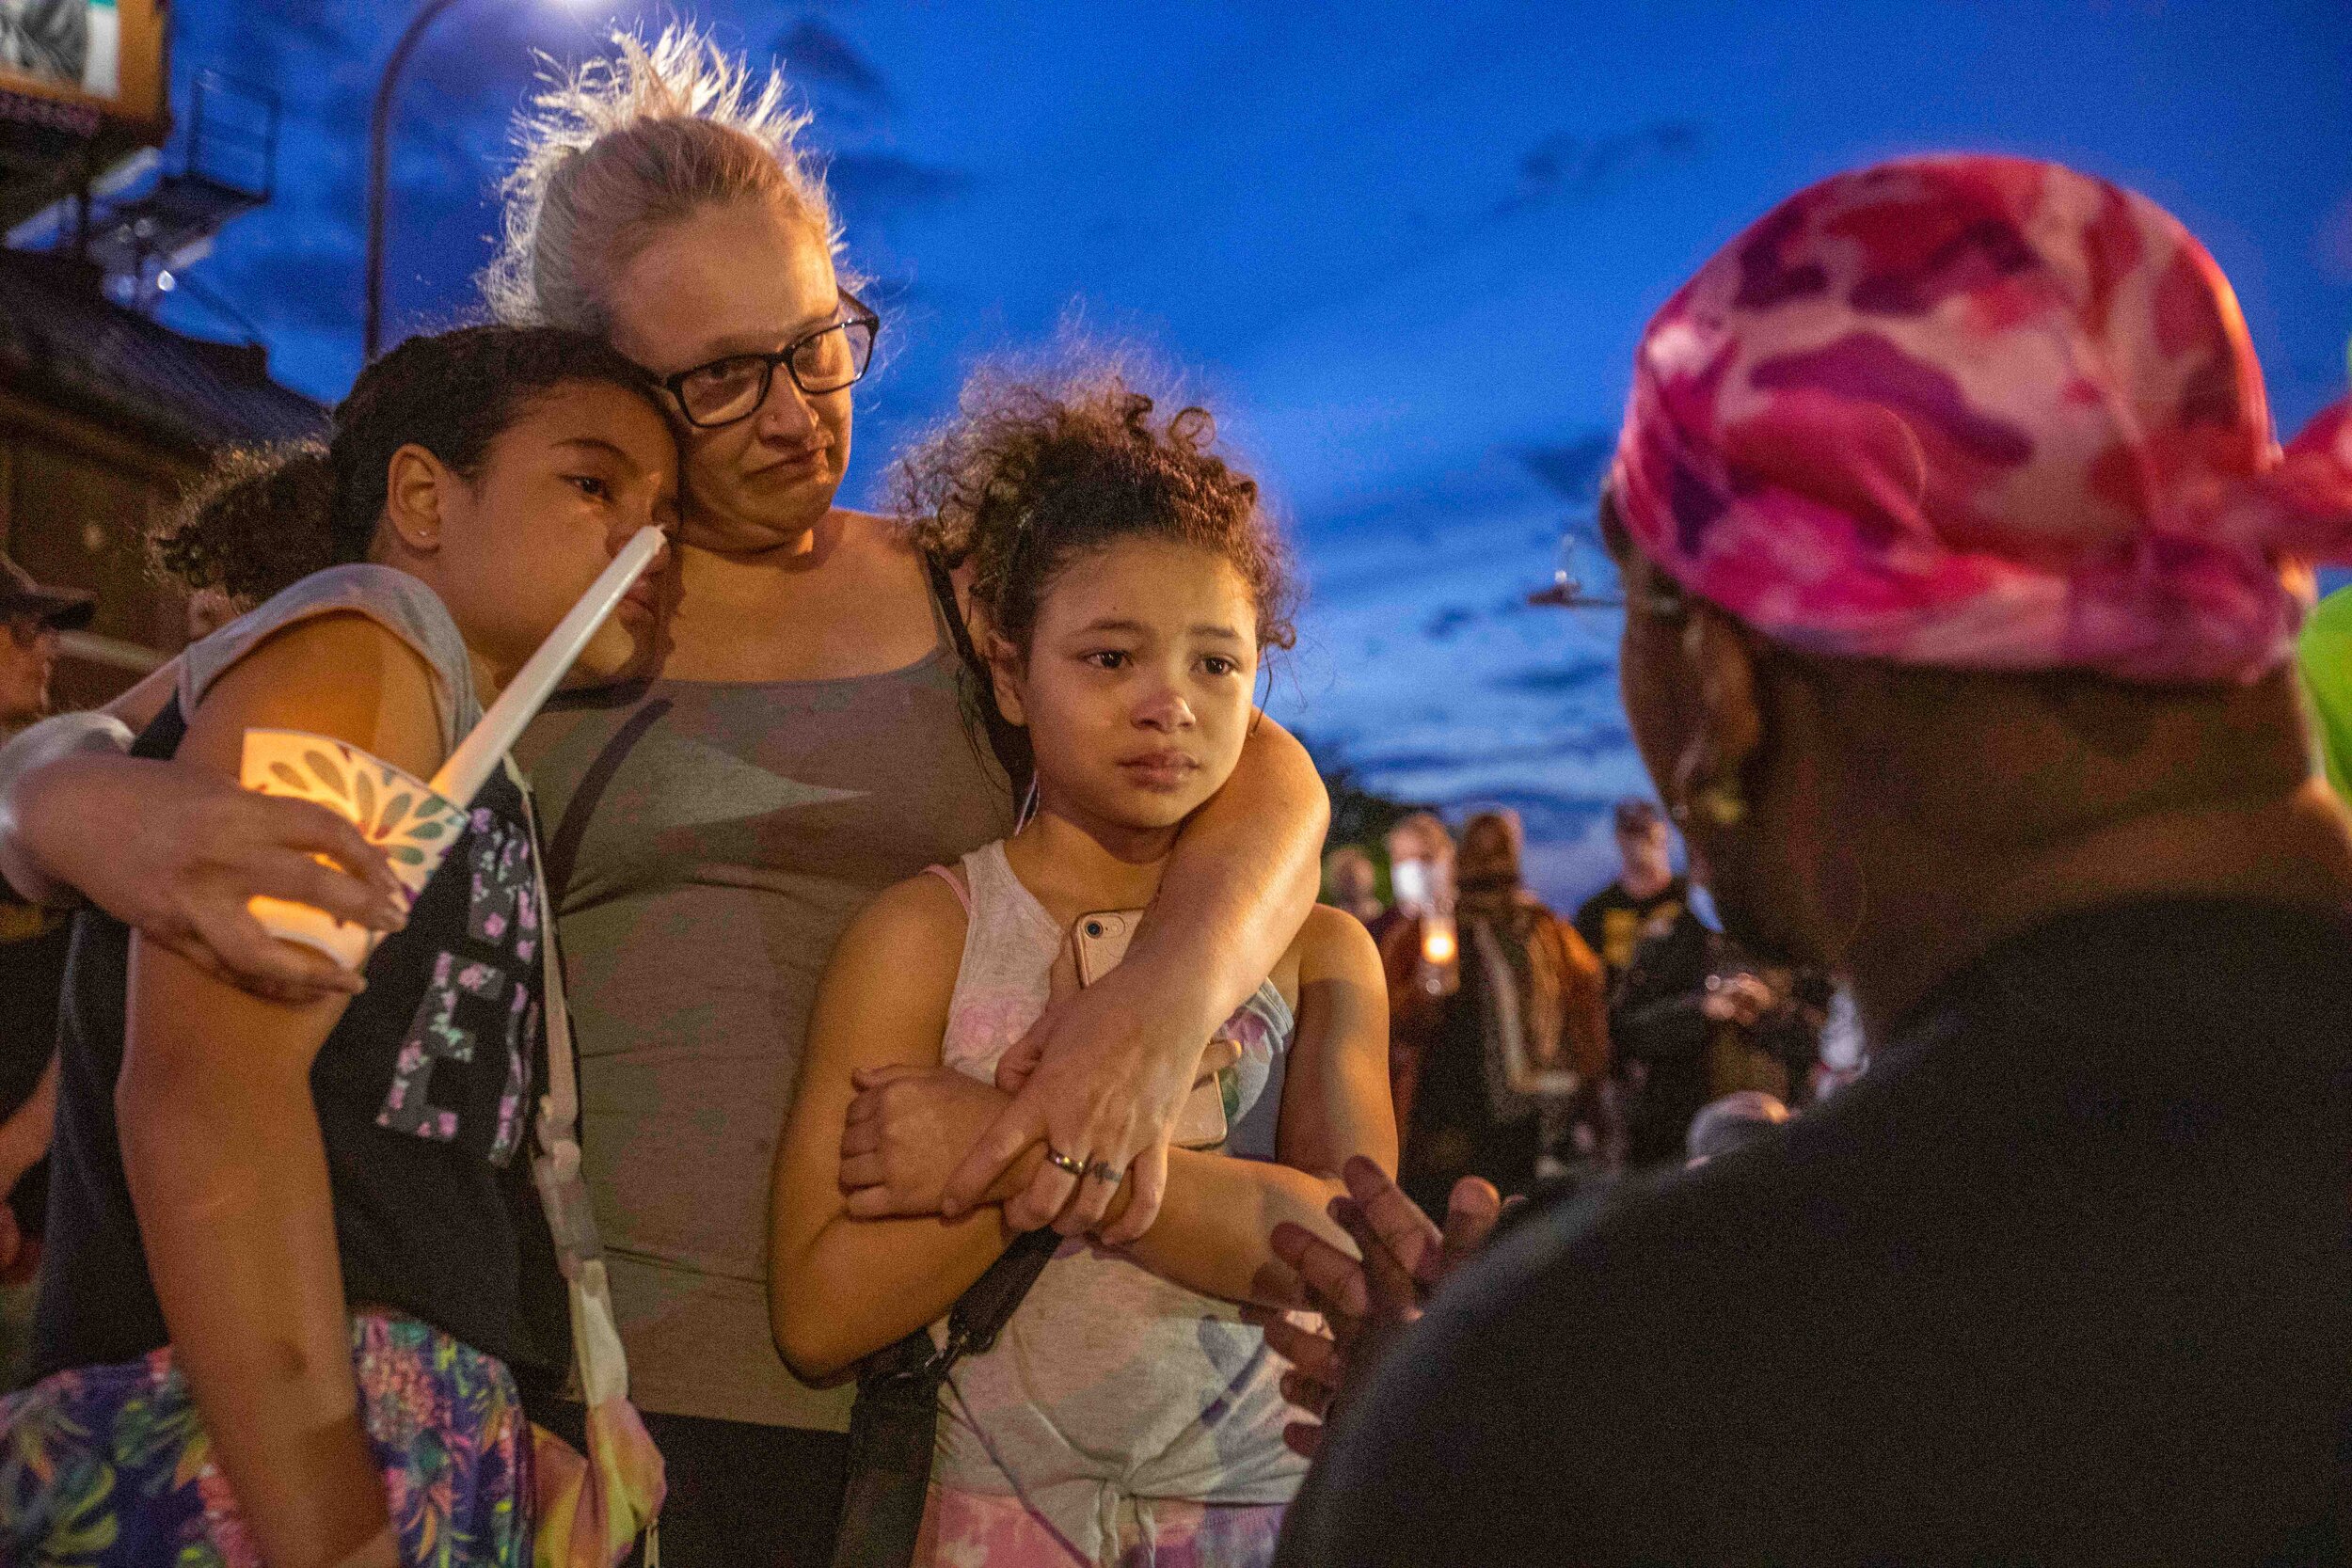  A man talks to 2 girls and tells them they're perfect and why they are out here fighting for justice at the site of the memorial for George Floyd in Minneapolis, Minnesota on Jun 14, 2020. 